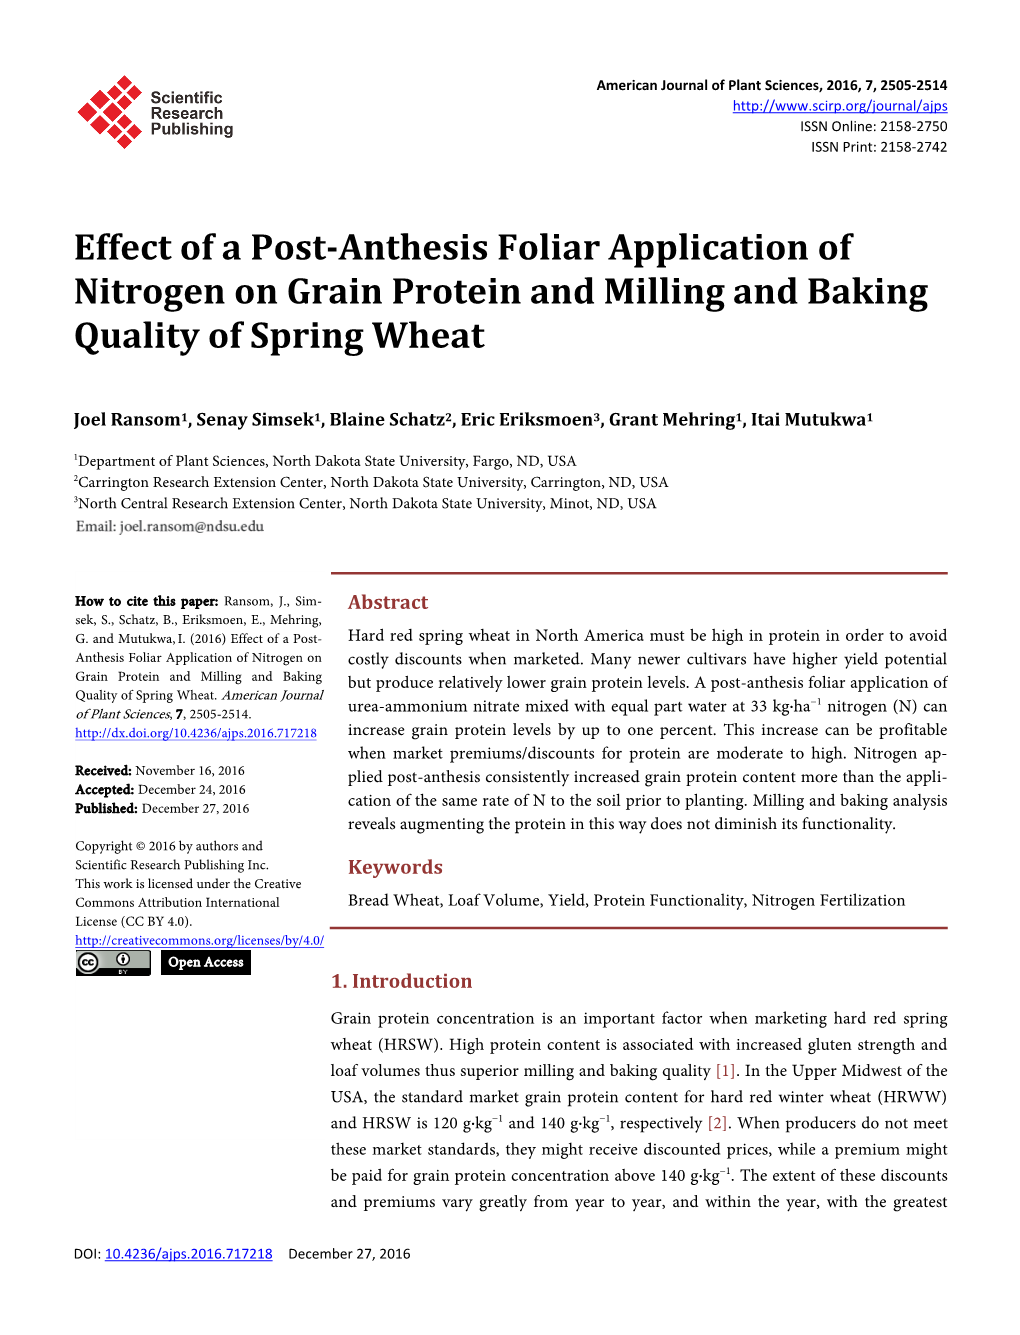 Effect of a Post-Anthesis Foliar Application of Nitrogen on Grain Protein and Milling and Baking Quality of Spring Wheat